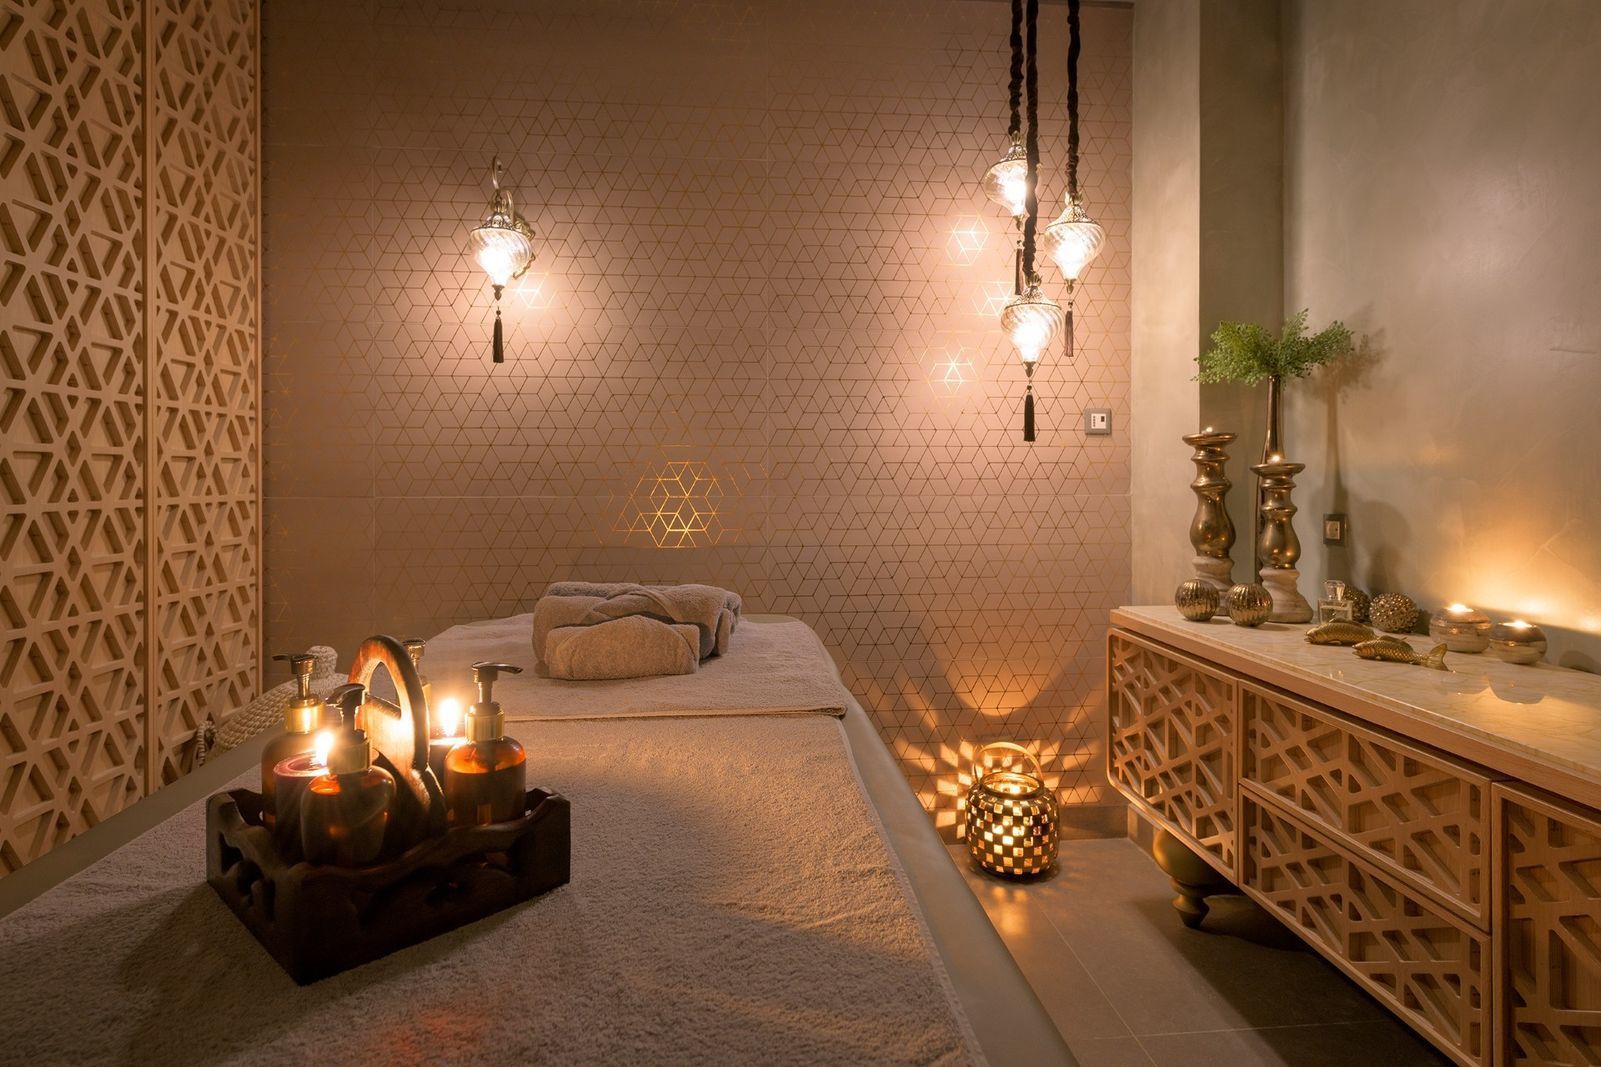 Olympic Palace Hotel | Massage & spa services -   17 beauty Spa relax ideas